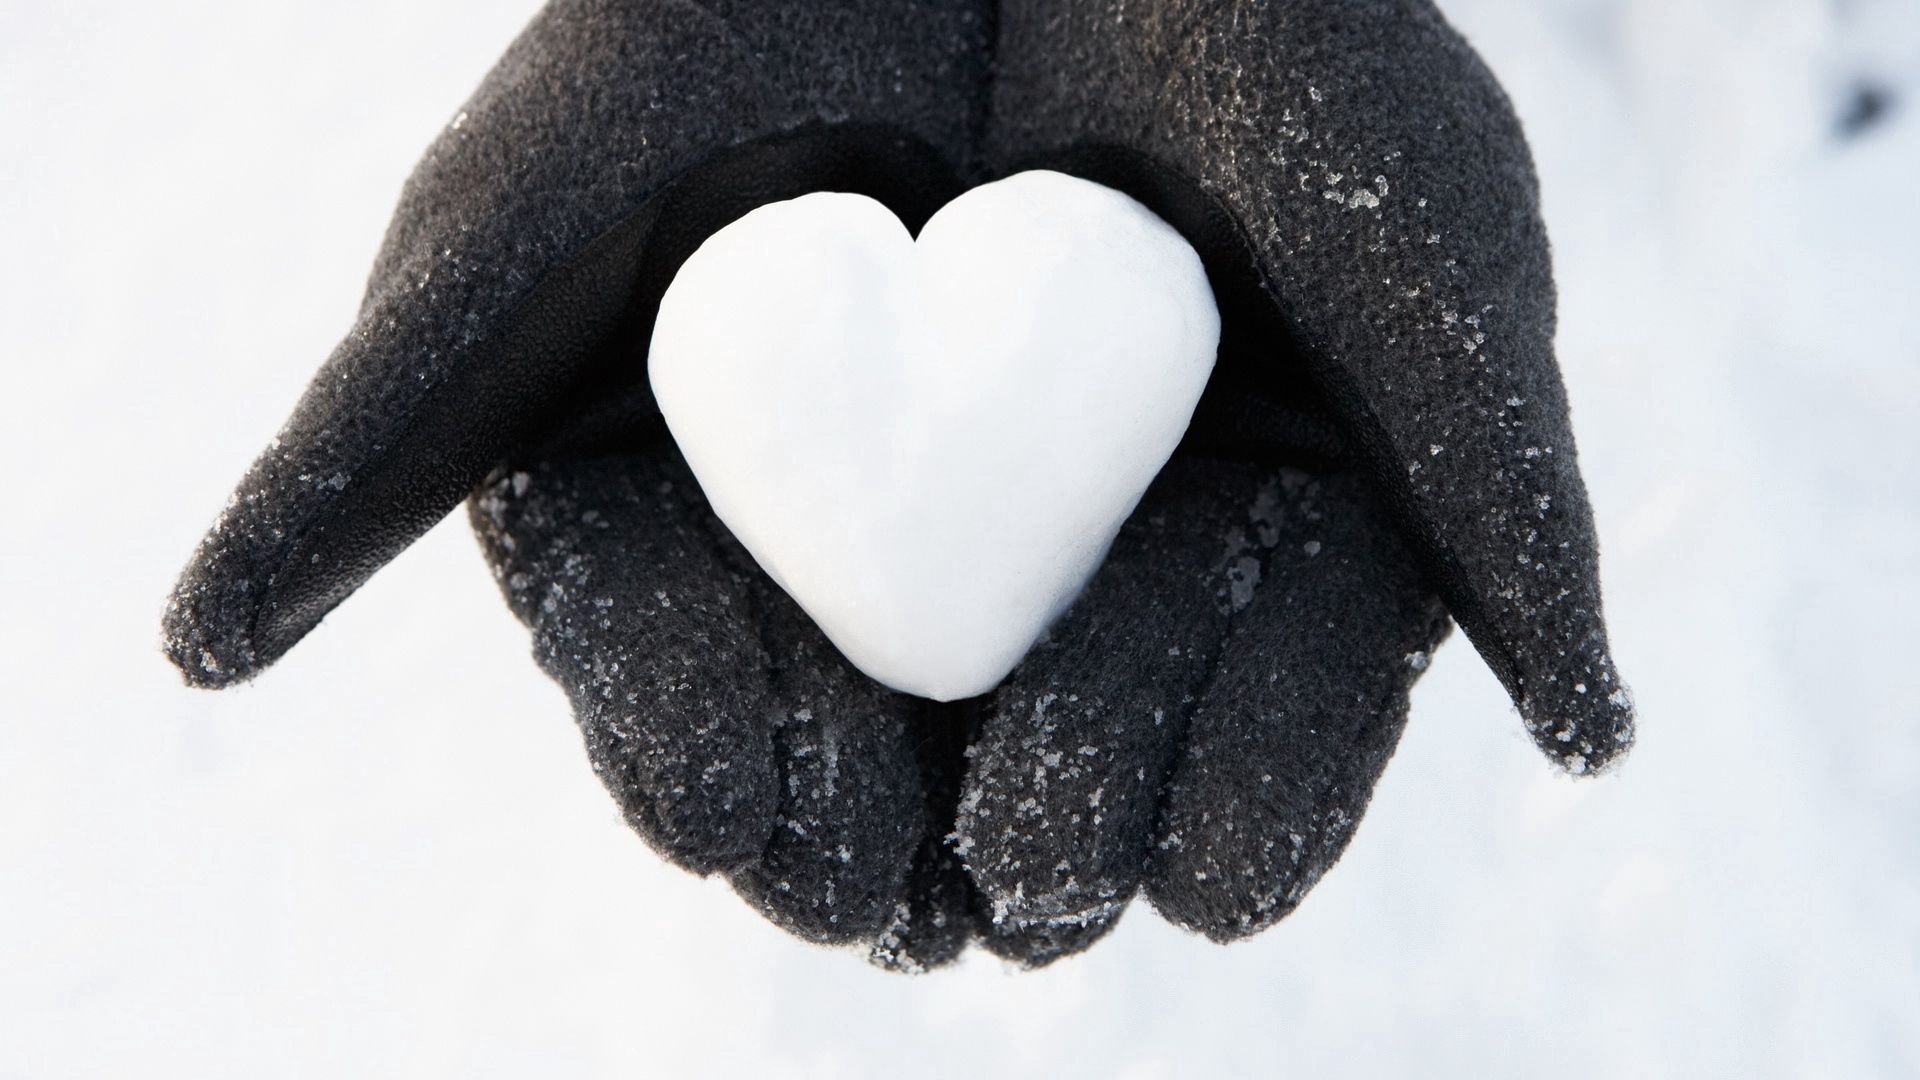 150047 3840x1080 PC pictures for free, download symbol, snow, hands, love 3840x1080 wallpapers on your desktop